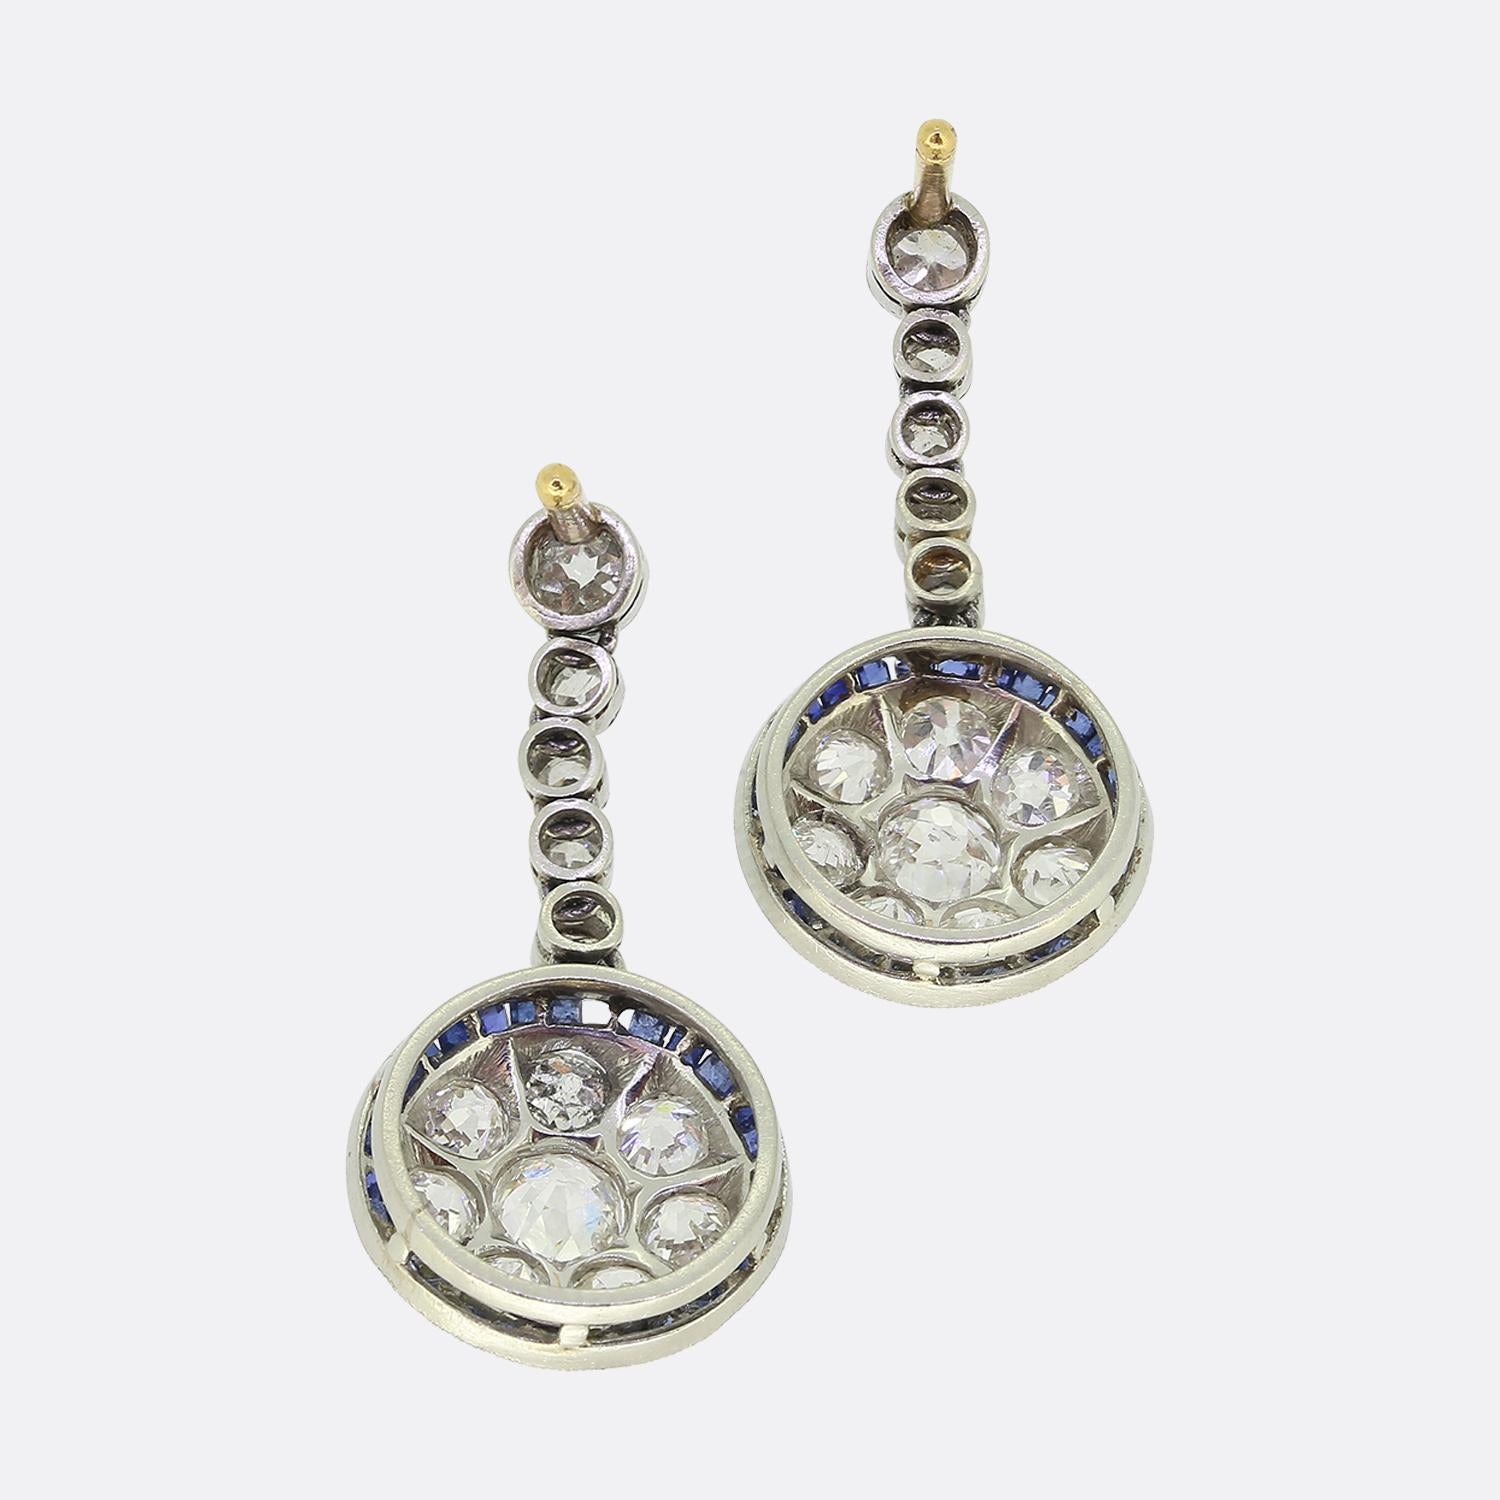 Here we have a delightful pair of drop earrings crafted at a time when the Art Deco style was at the forefront of design. Five individually milgrain set old cut diamonds play host to a circular target motif below. This clustered design consists of